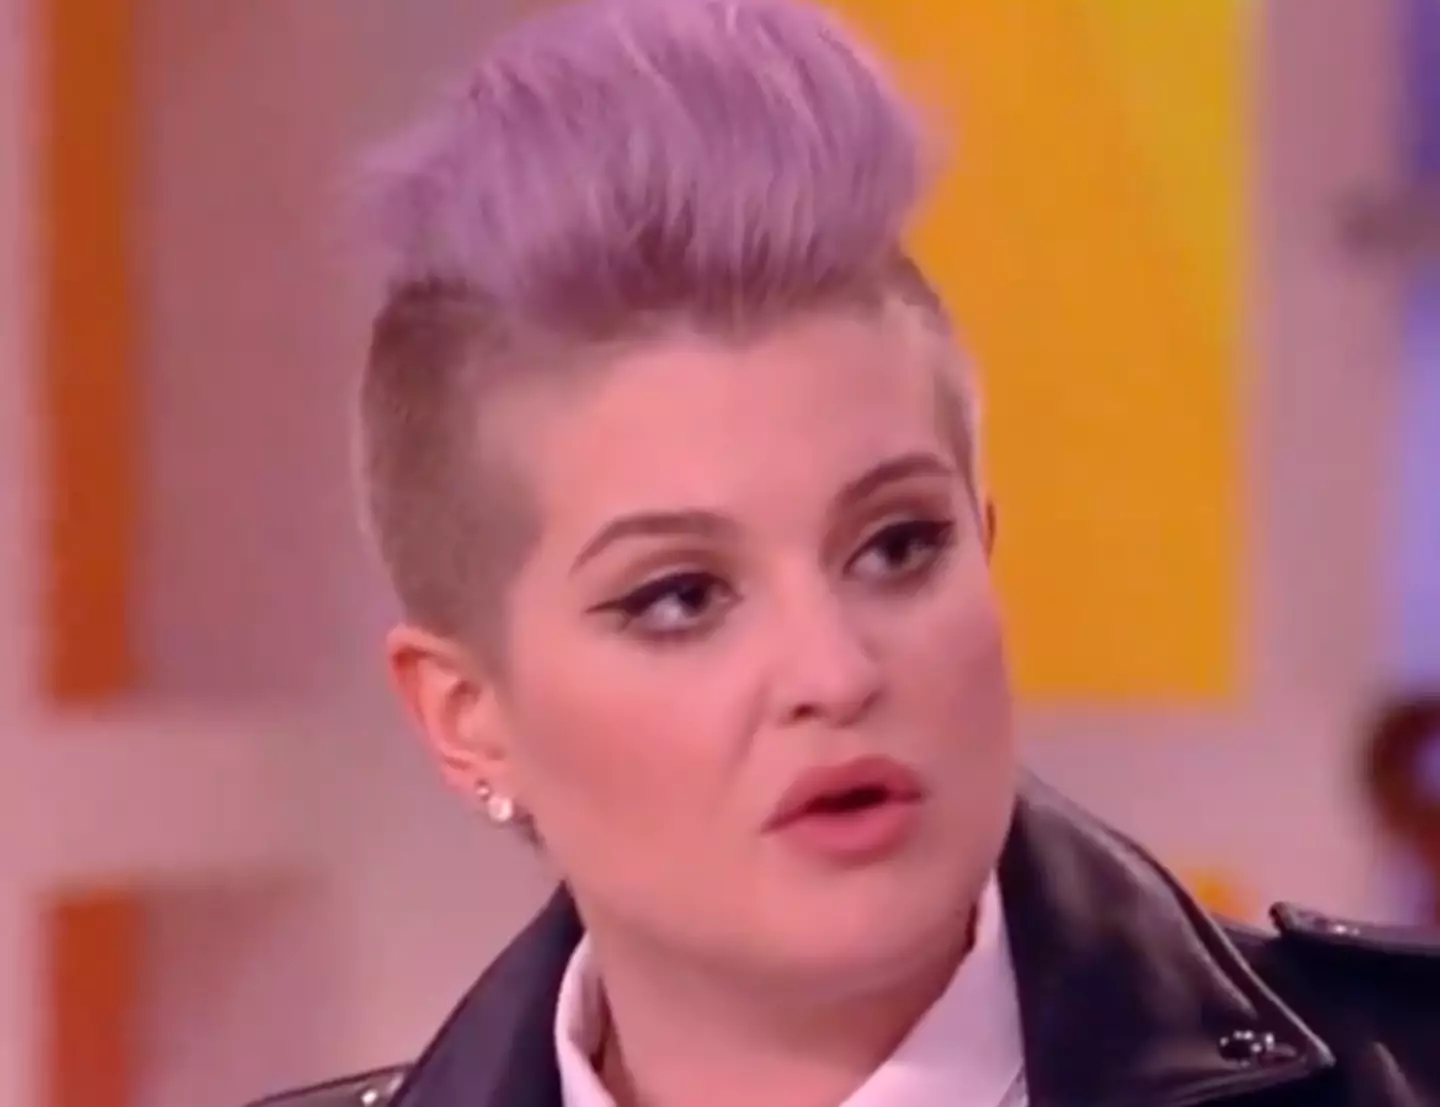 Kelly Osbourne insisted she was not racist.